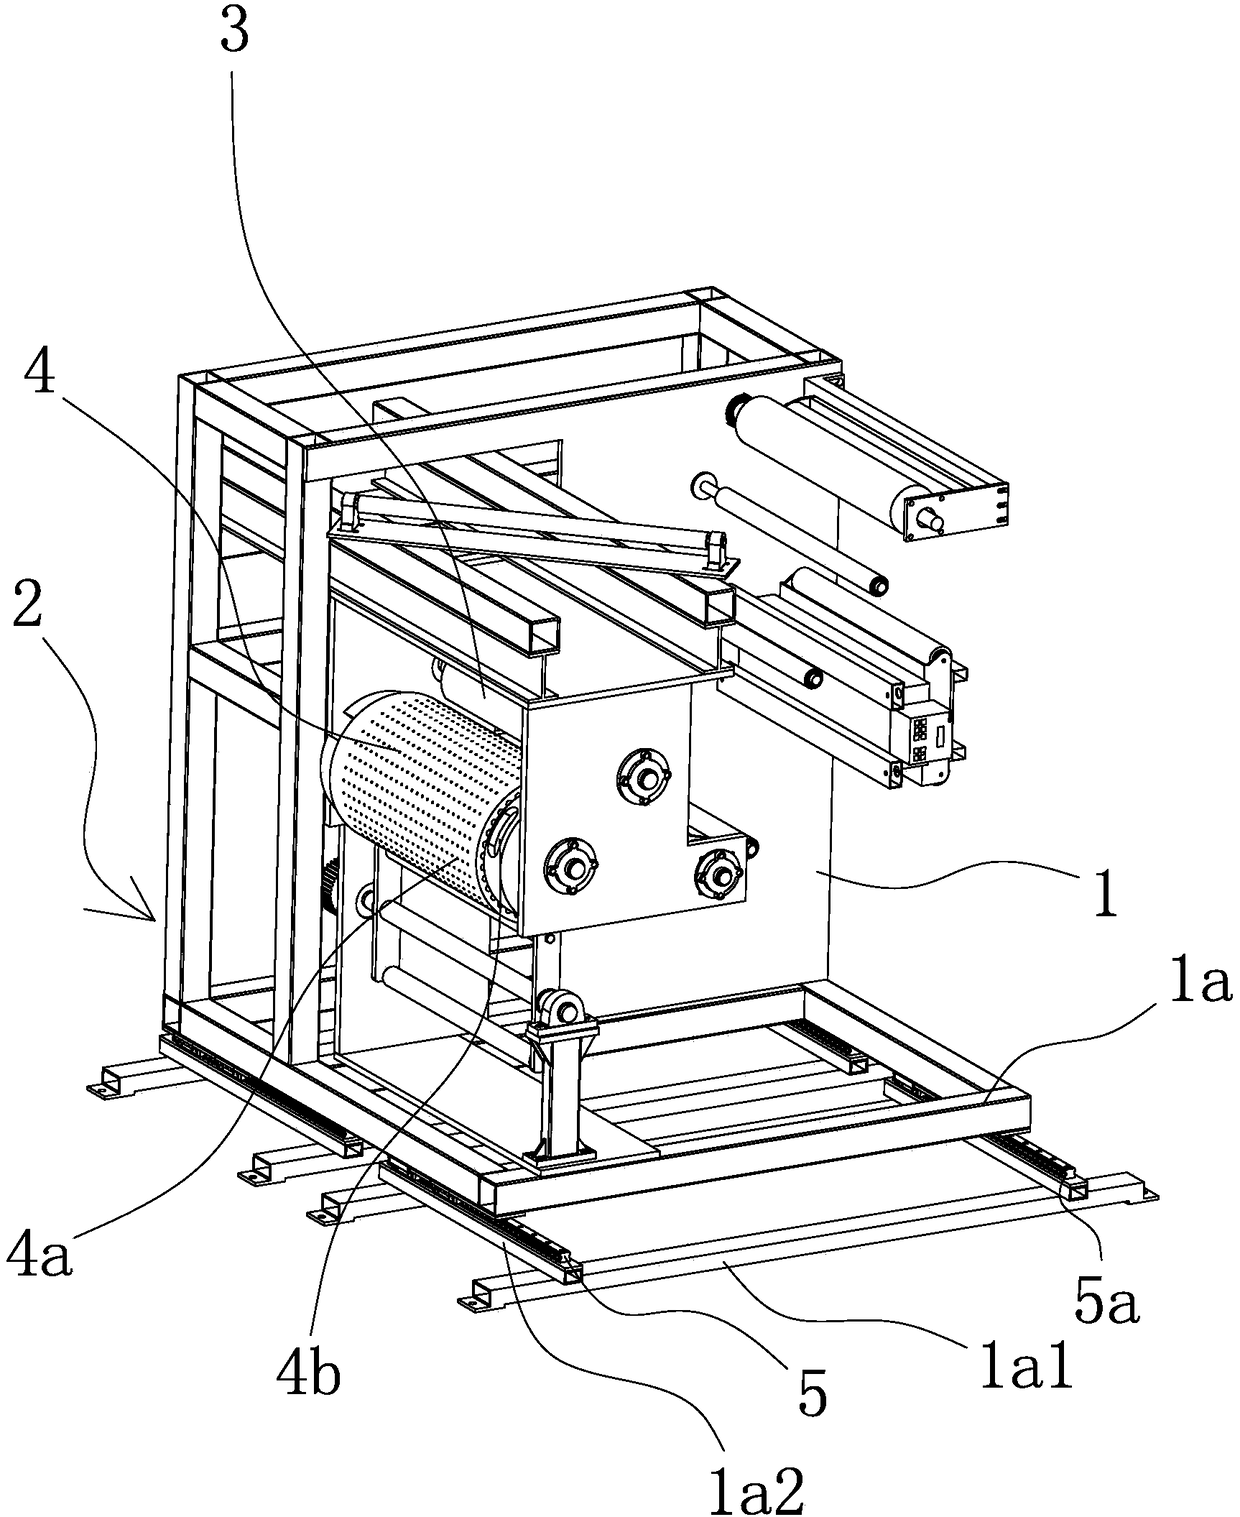 Automatic processing method of surgical drapes